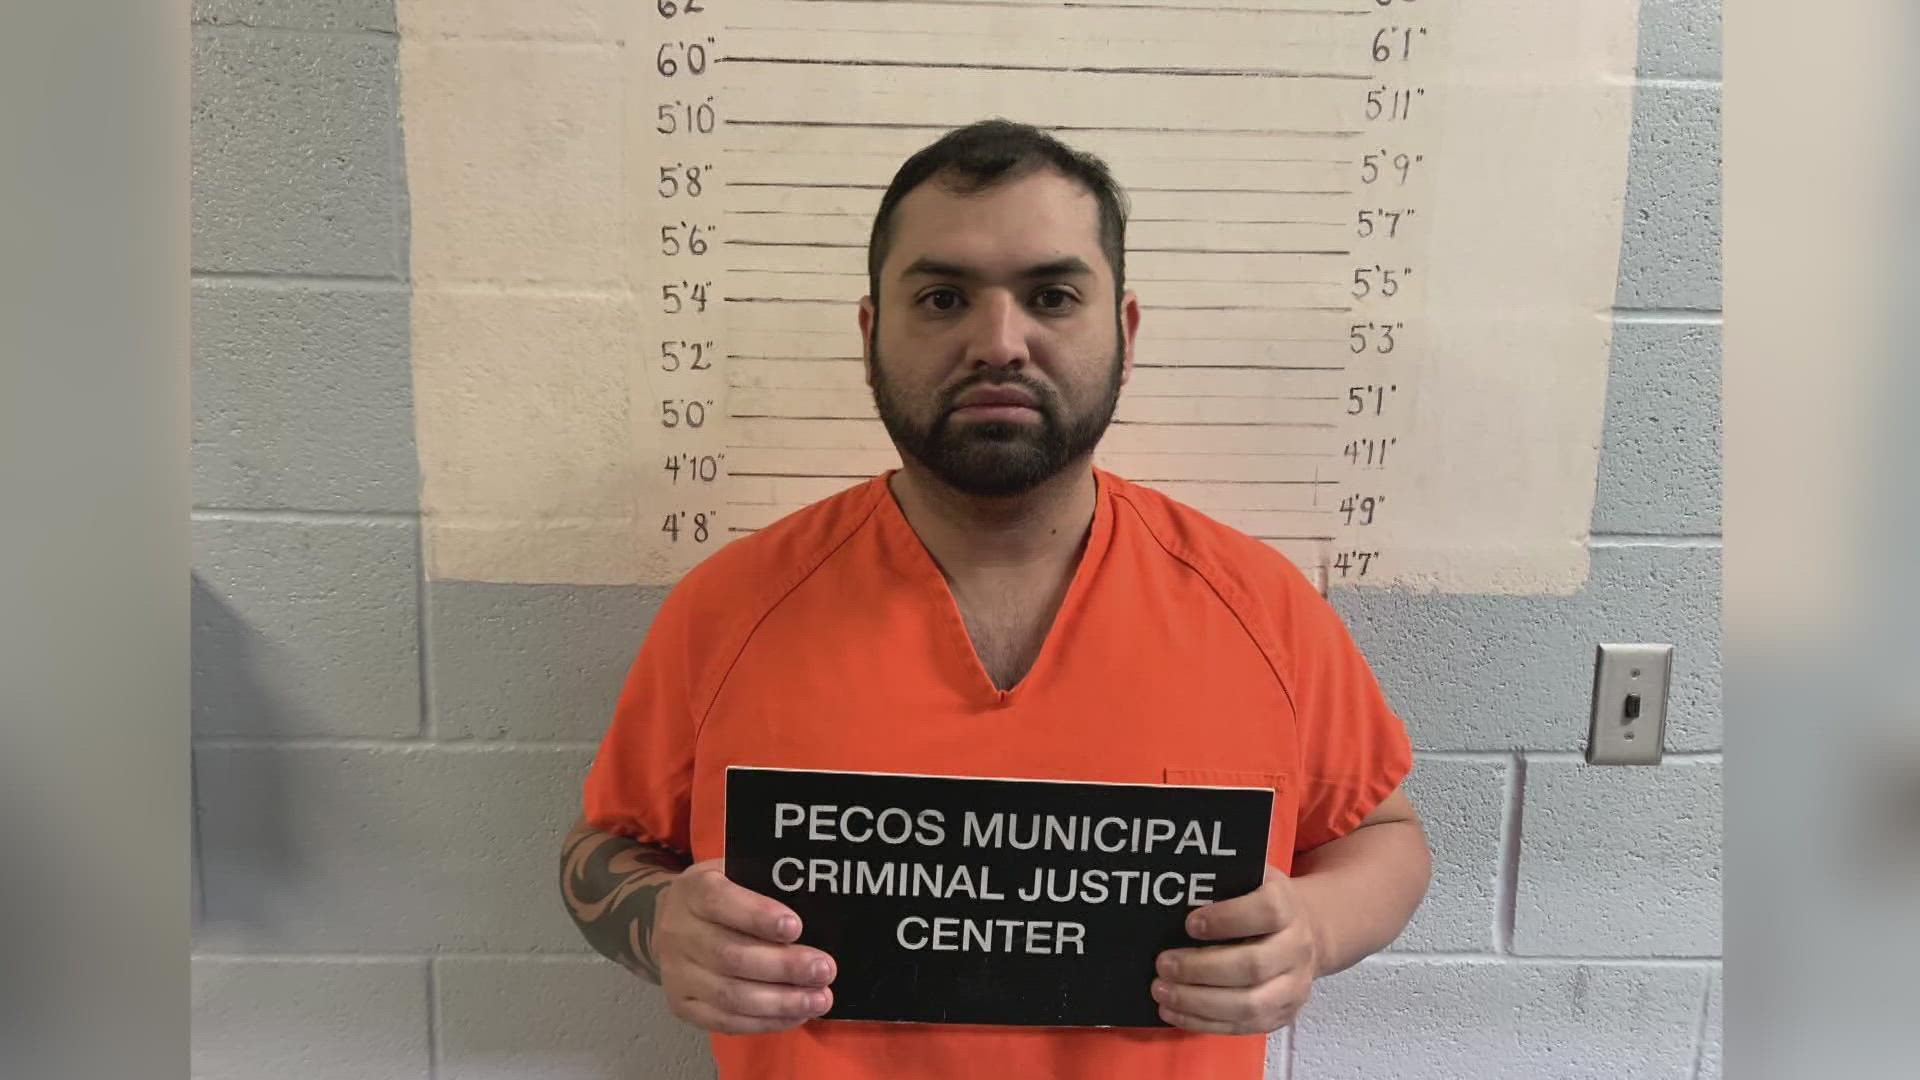 31-year-old Jose Manuel Hernandez was wanted by the Pecos Police Department and the Reeves County Sheriff's Office.